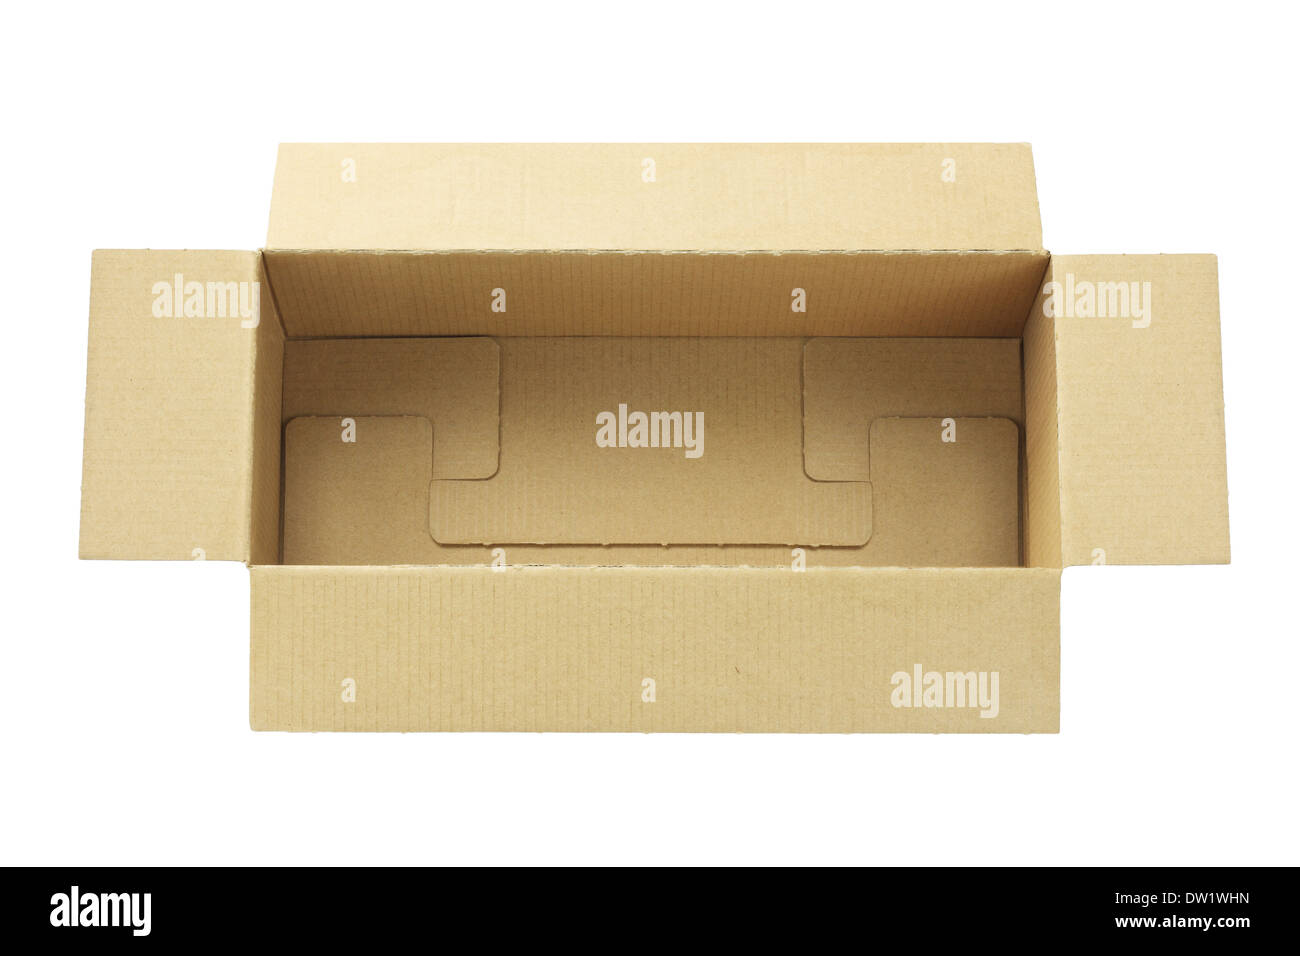 Elevated View Of An Open Rectangular Box On White Background Stock Photo